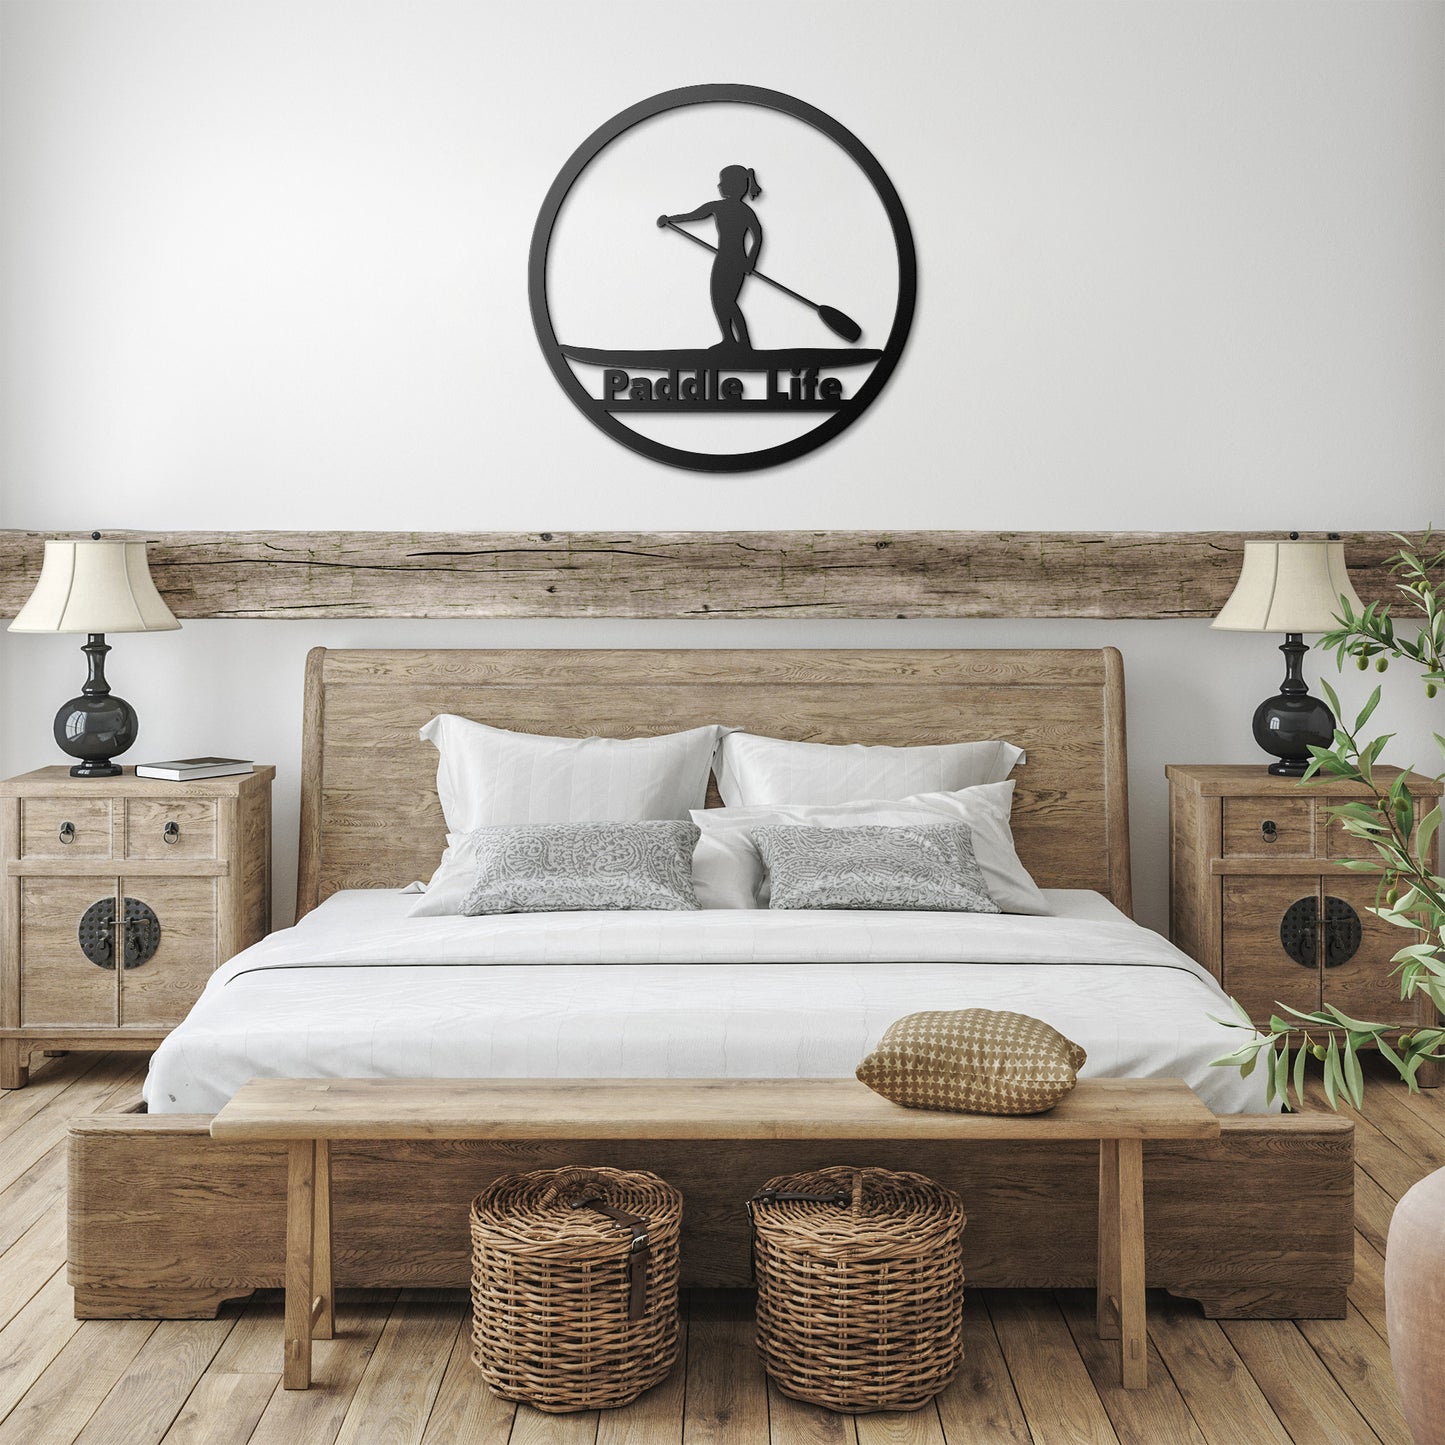 Metal Sign- Female Paddle Boarder- Paddle Life Indoor/Outdoor Metal Sign